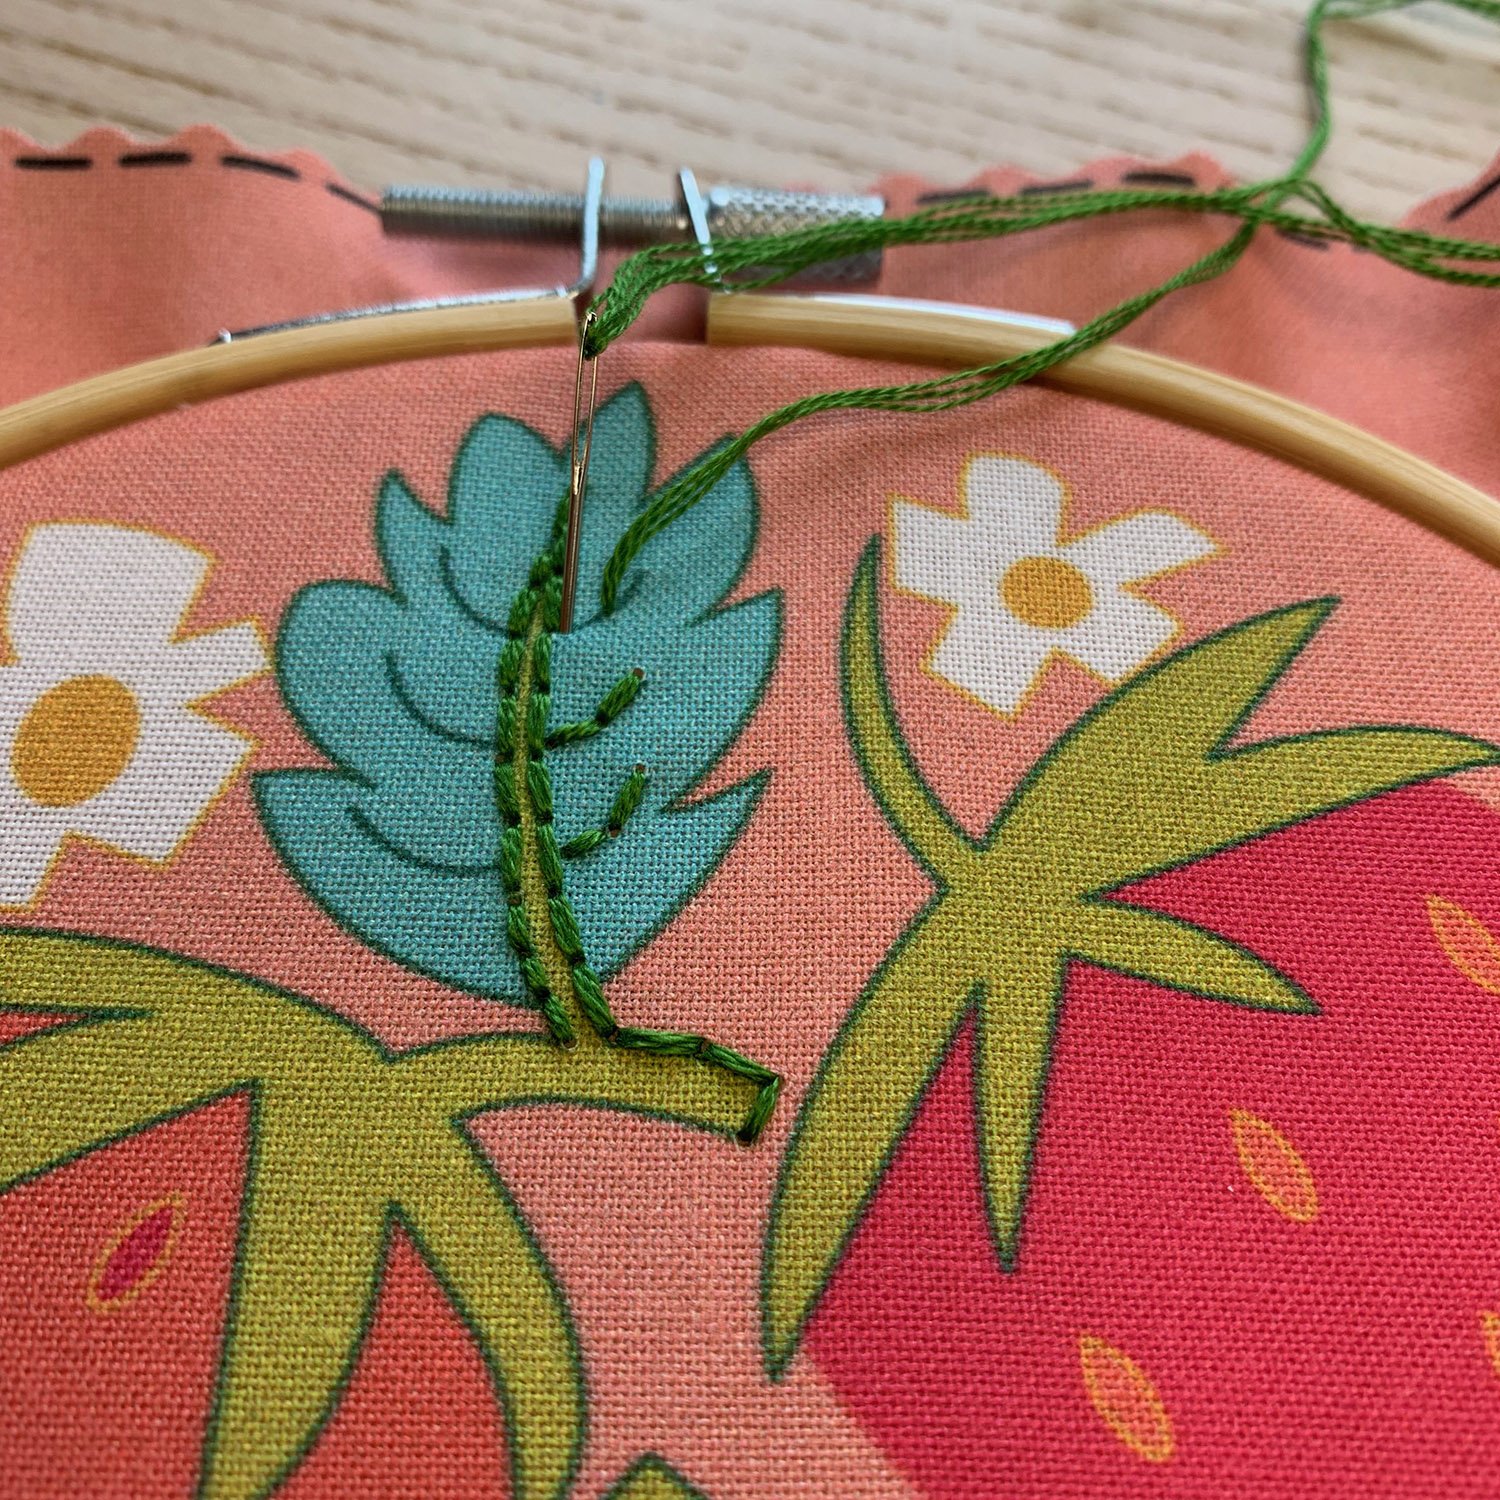 Strawberry embroidery detail 1.jpg